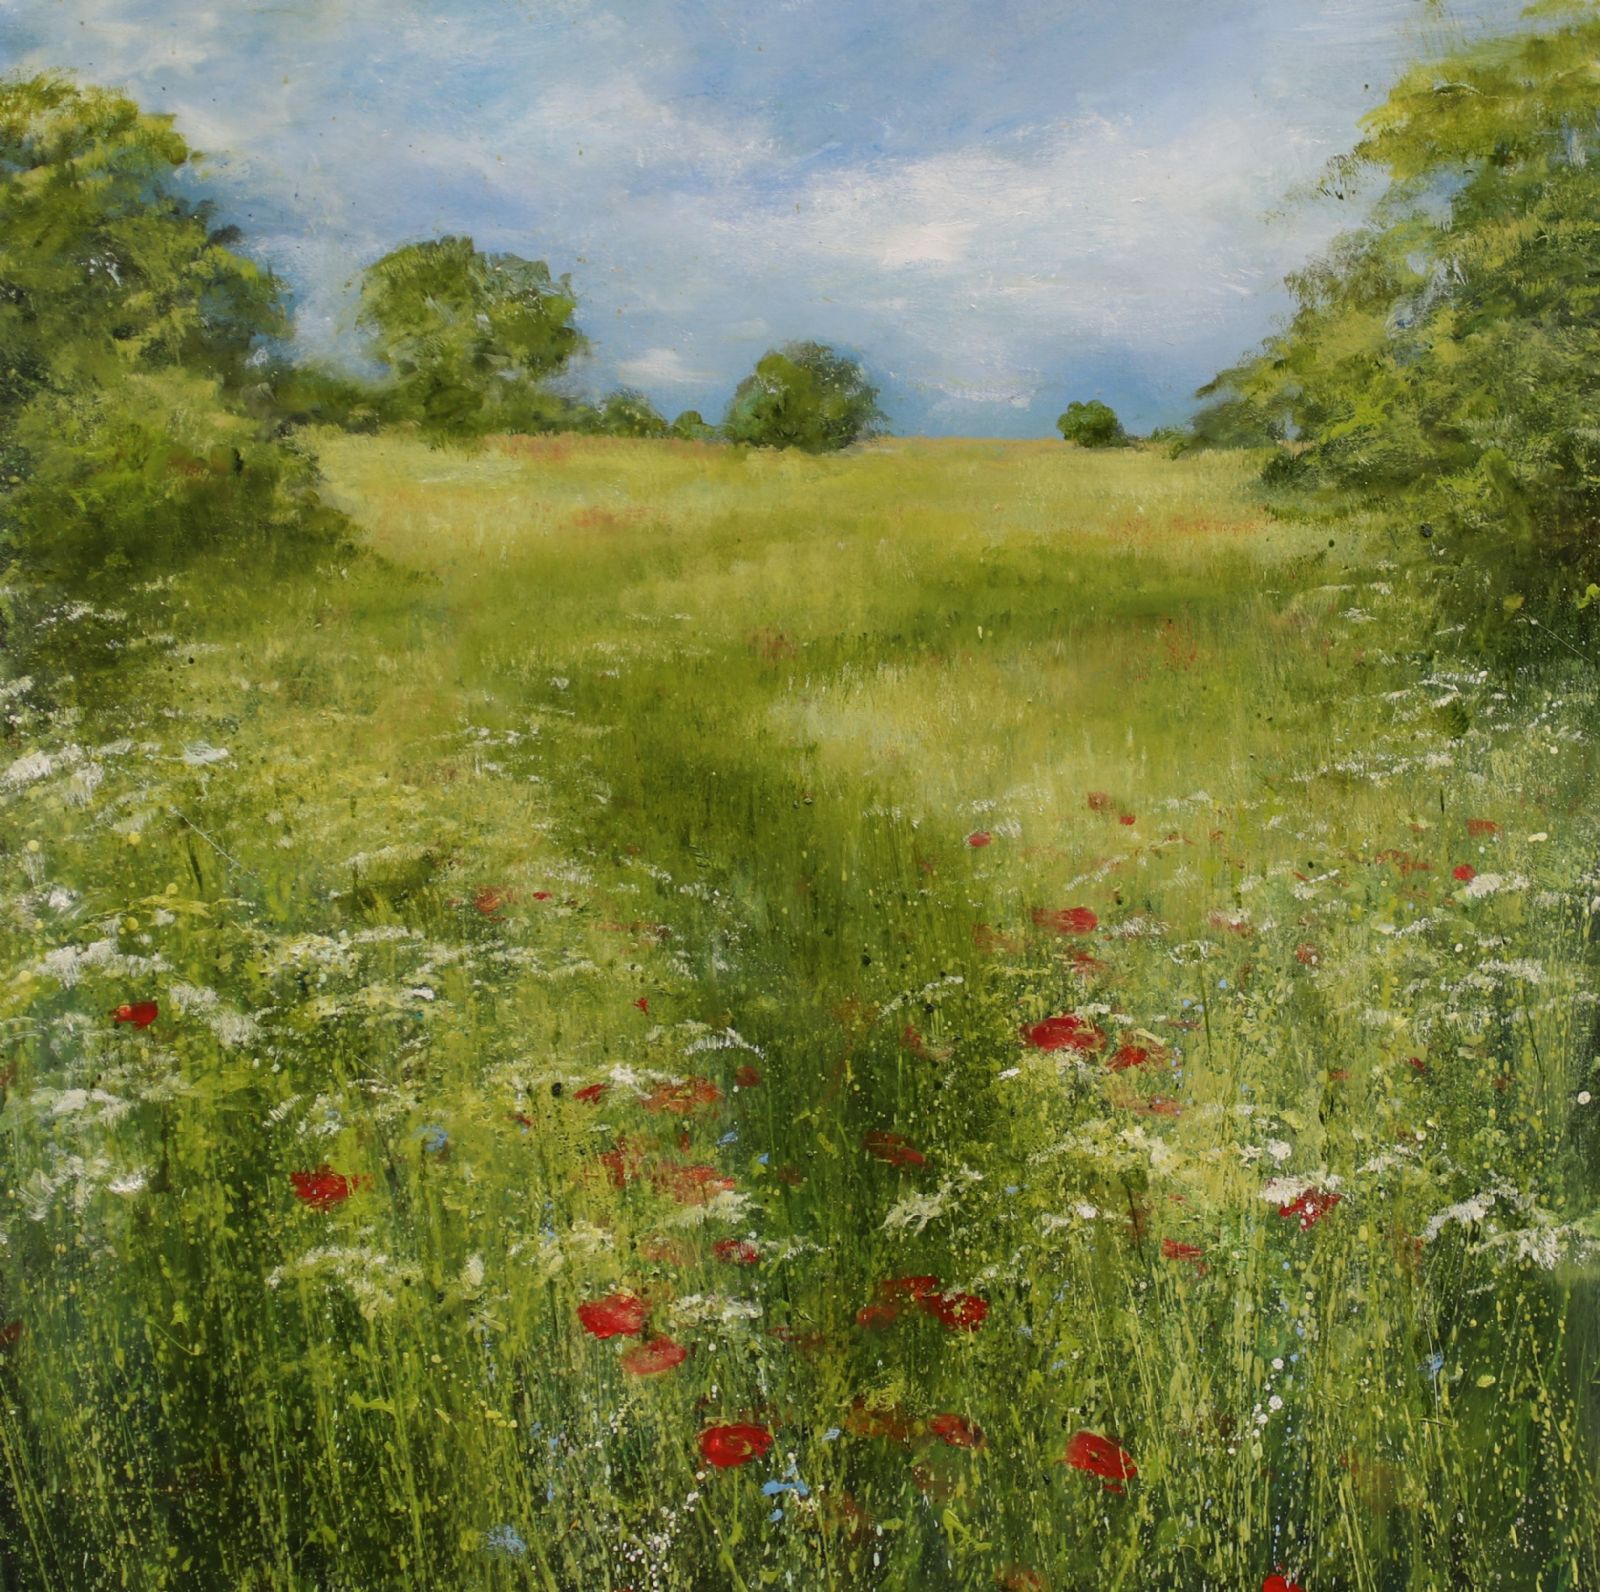 Poppies in the Meadow by Garry Pereira